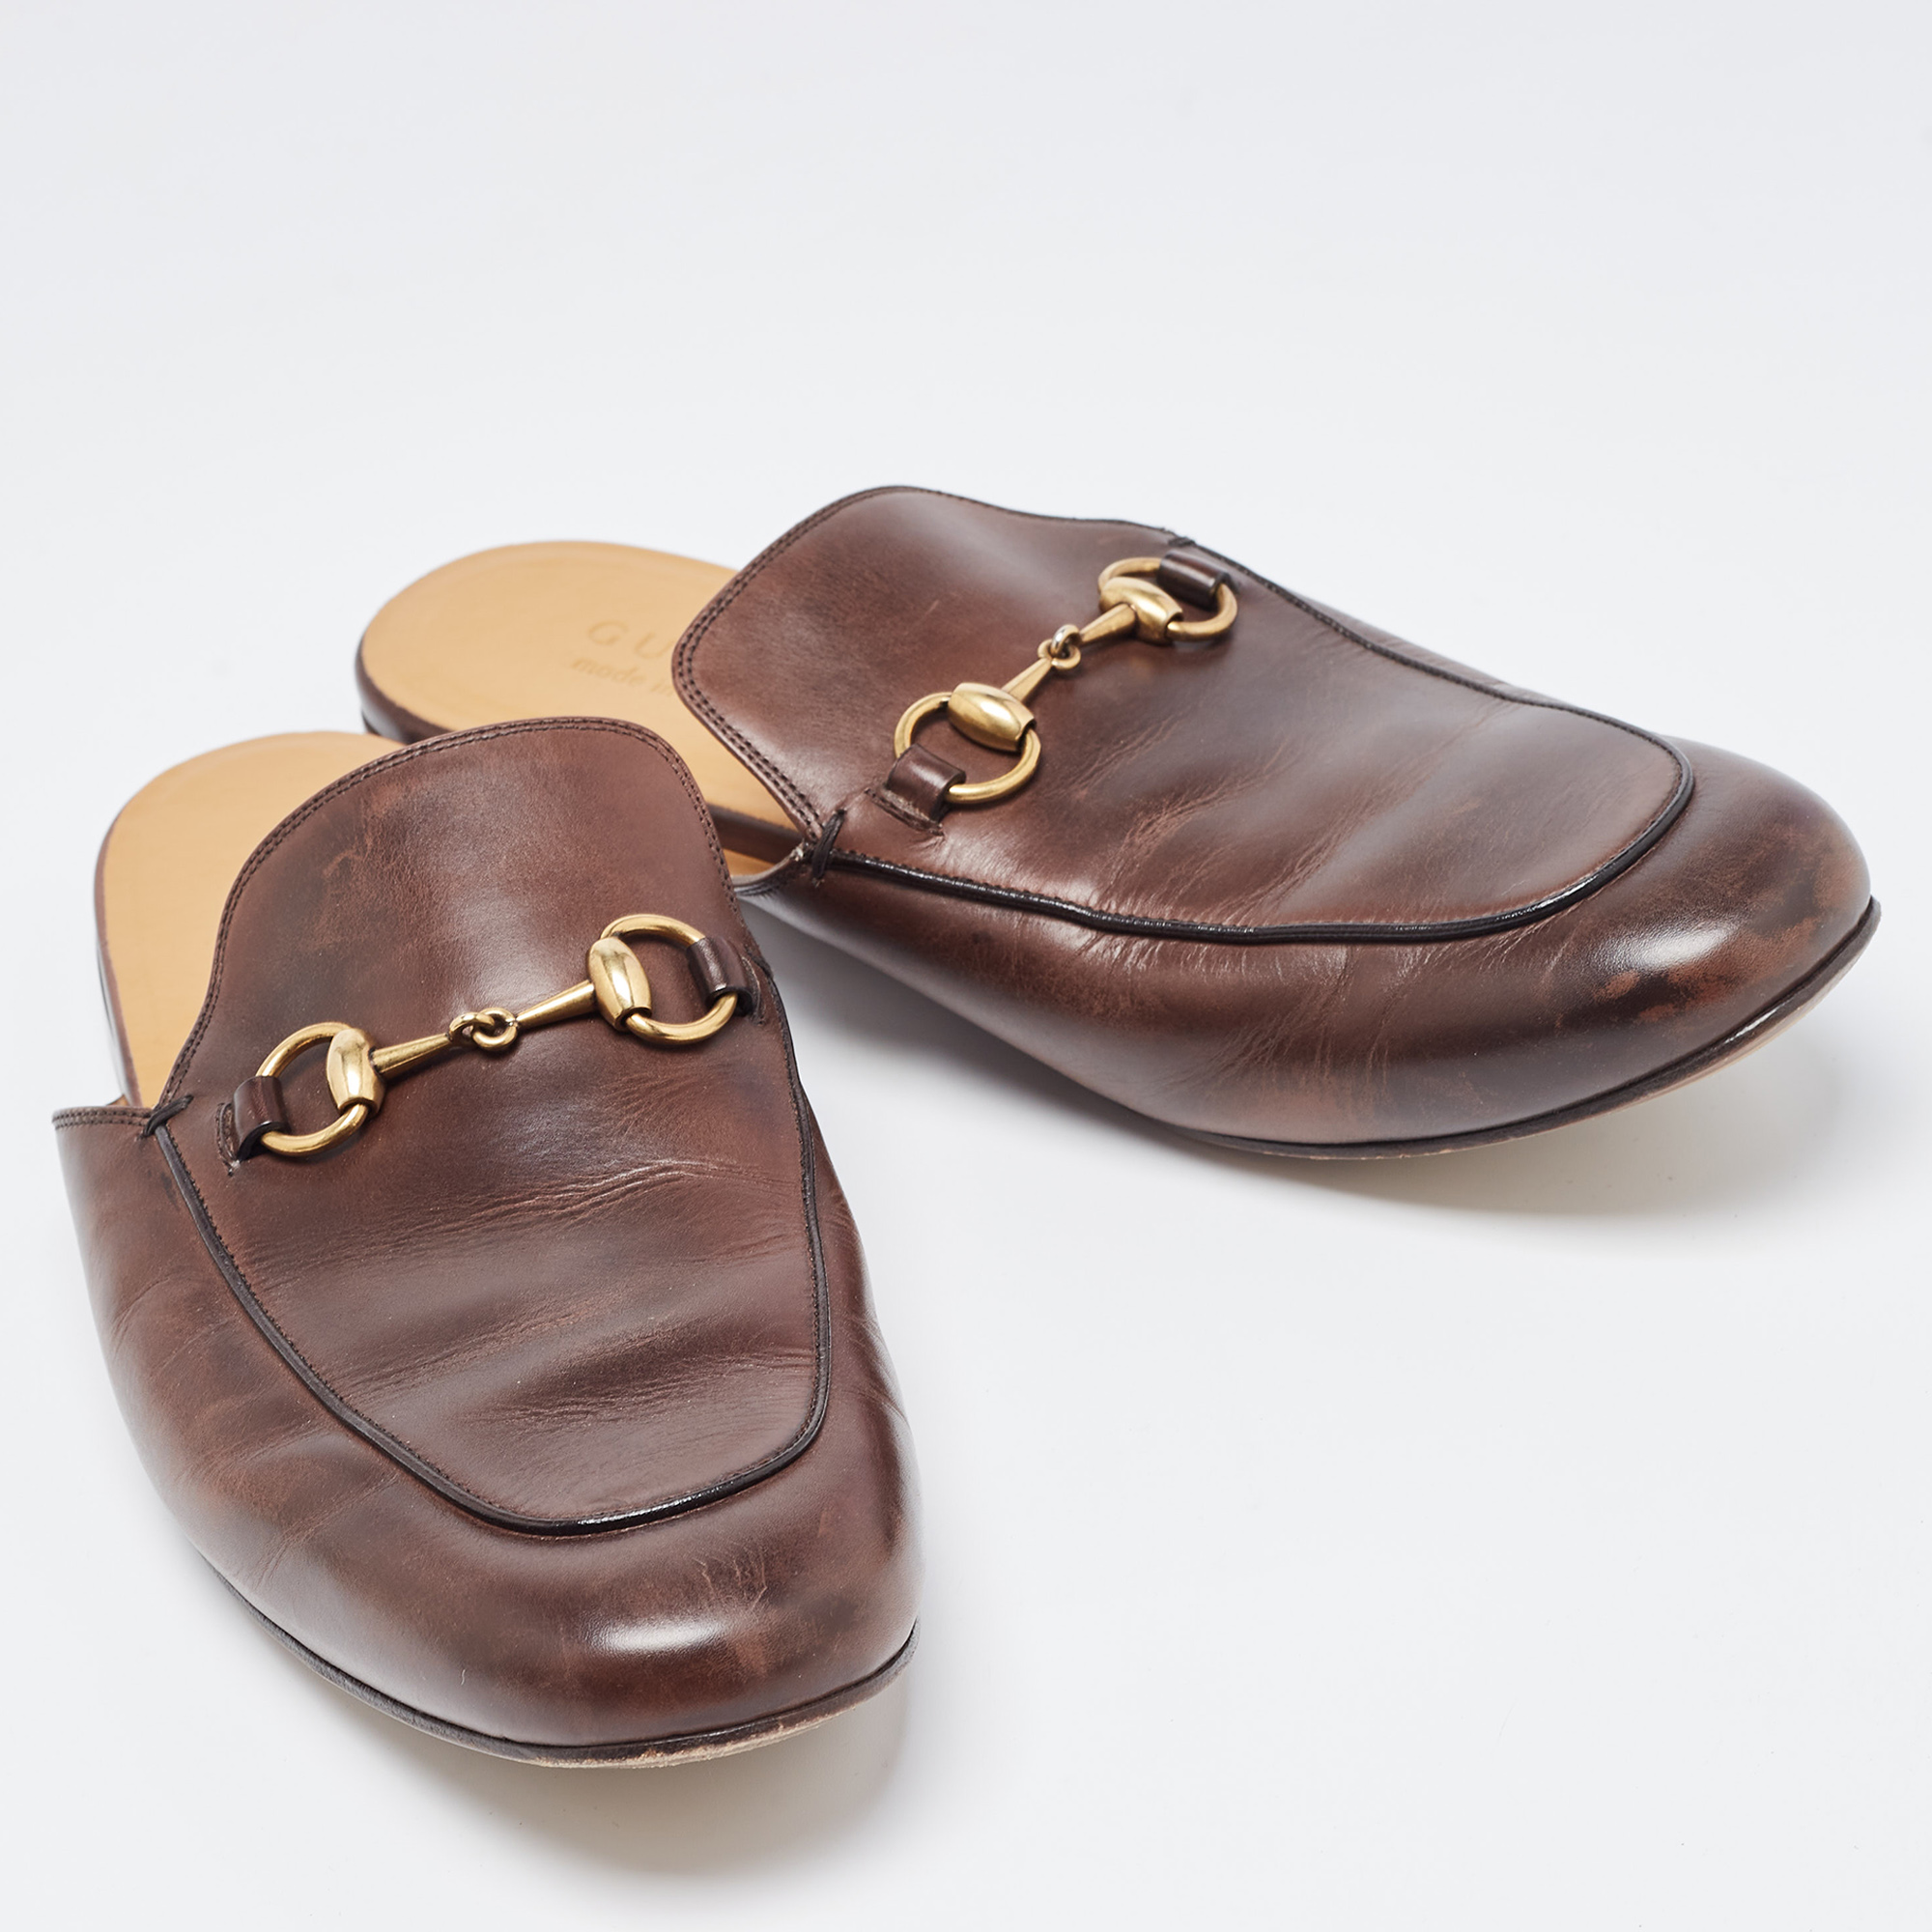 Gucci Brown Leather Horsebit Princetown Flat Mules Size 43